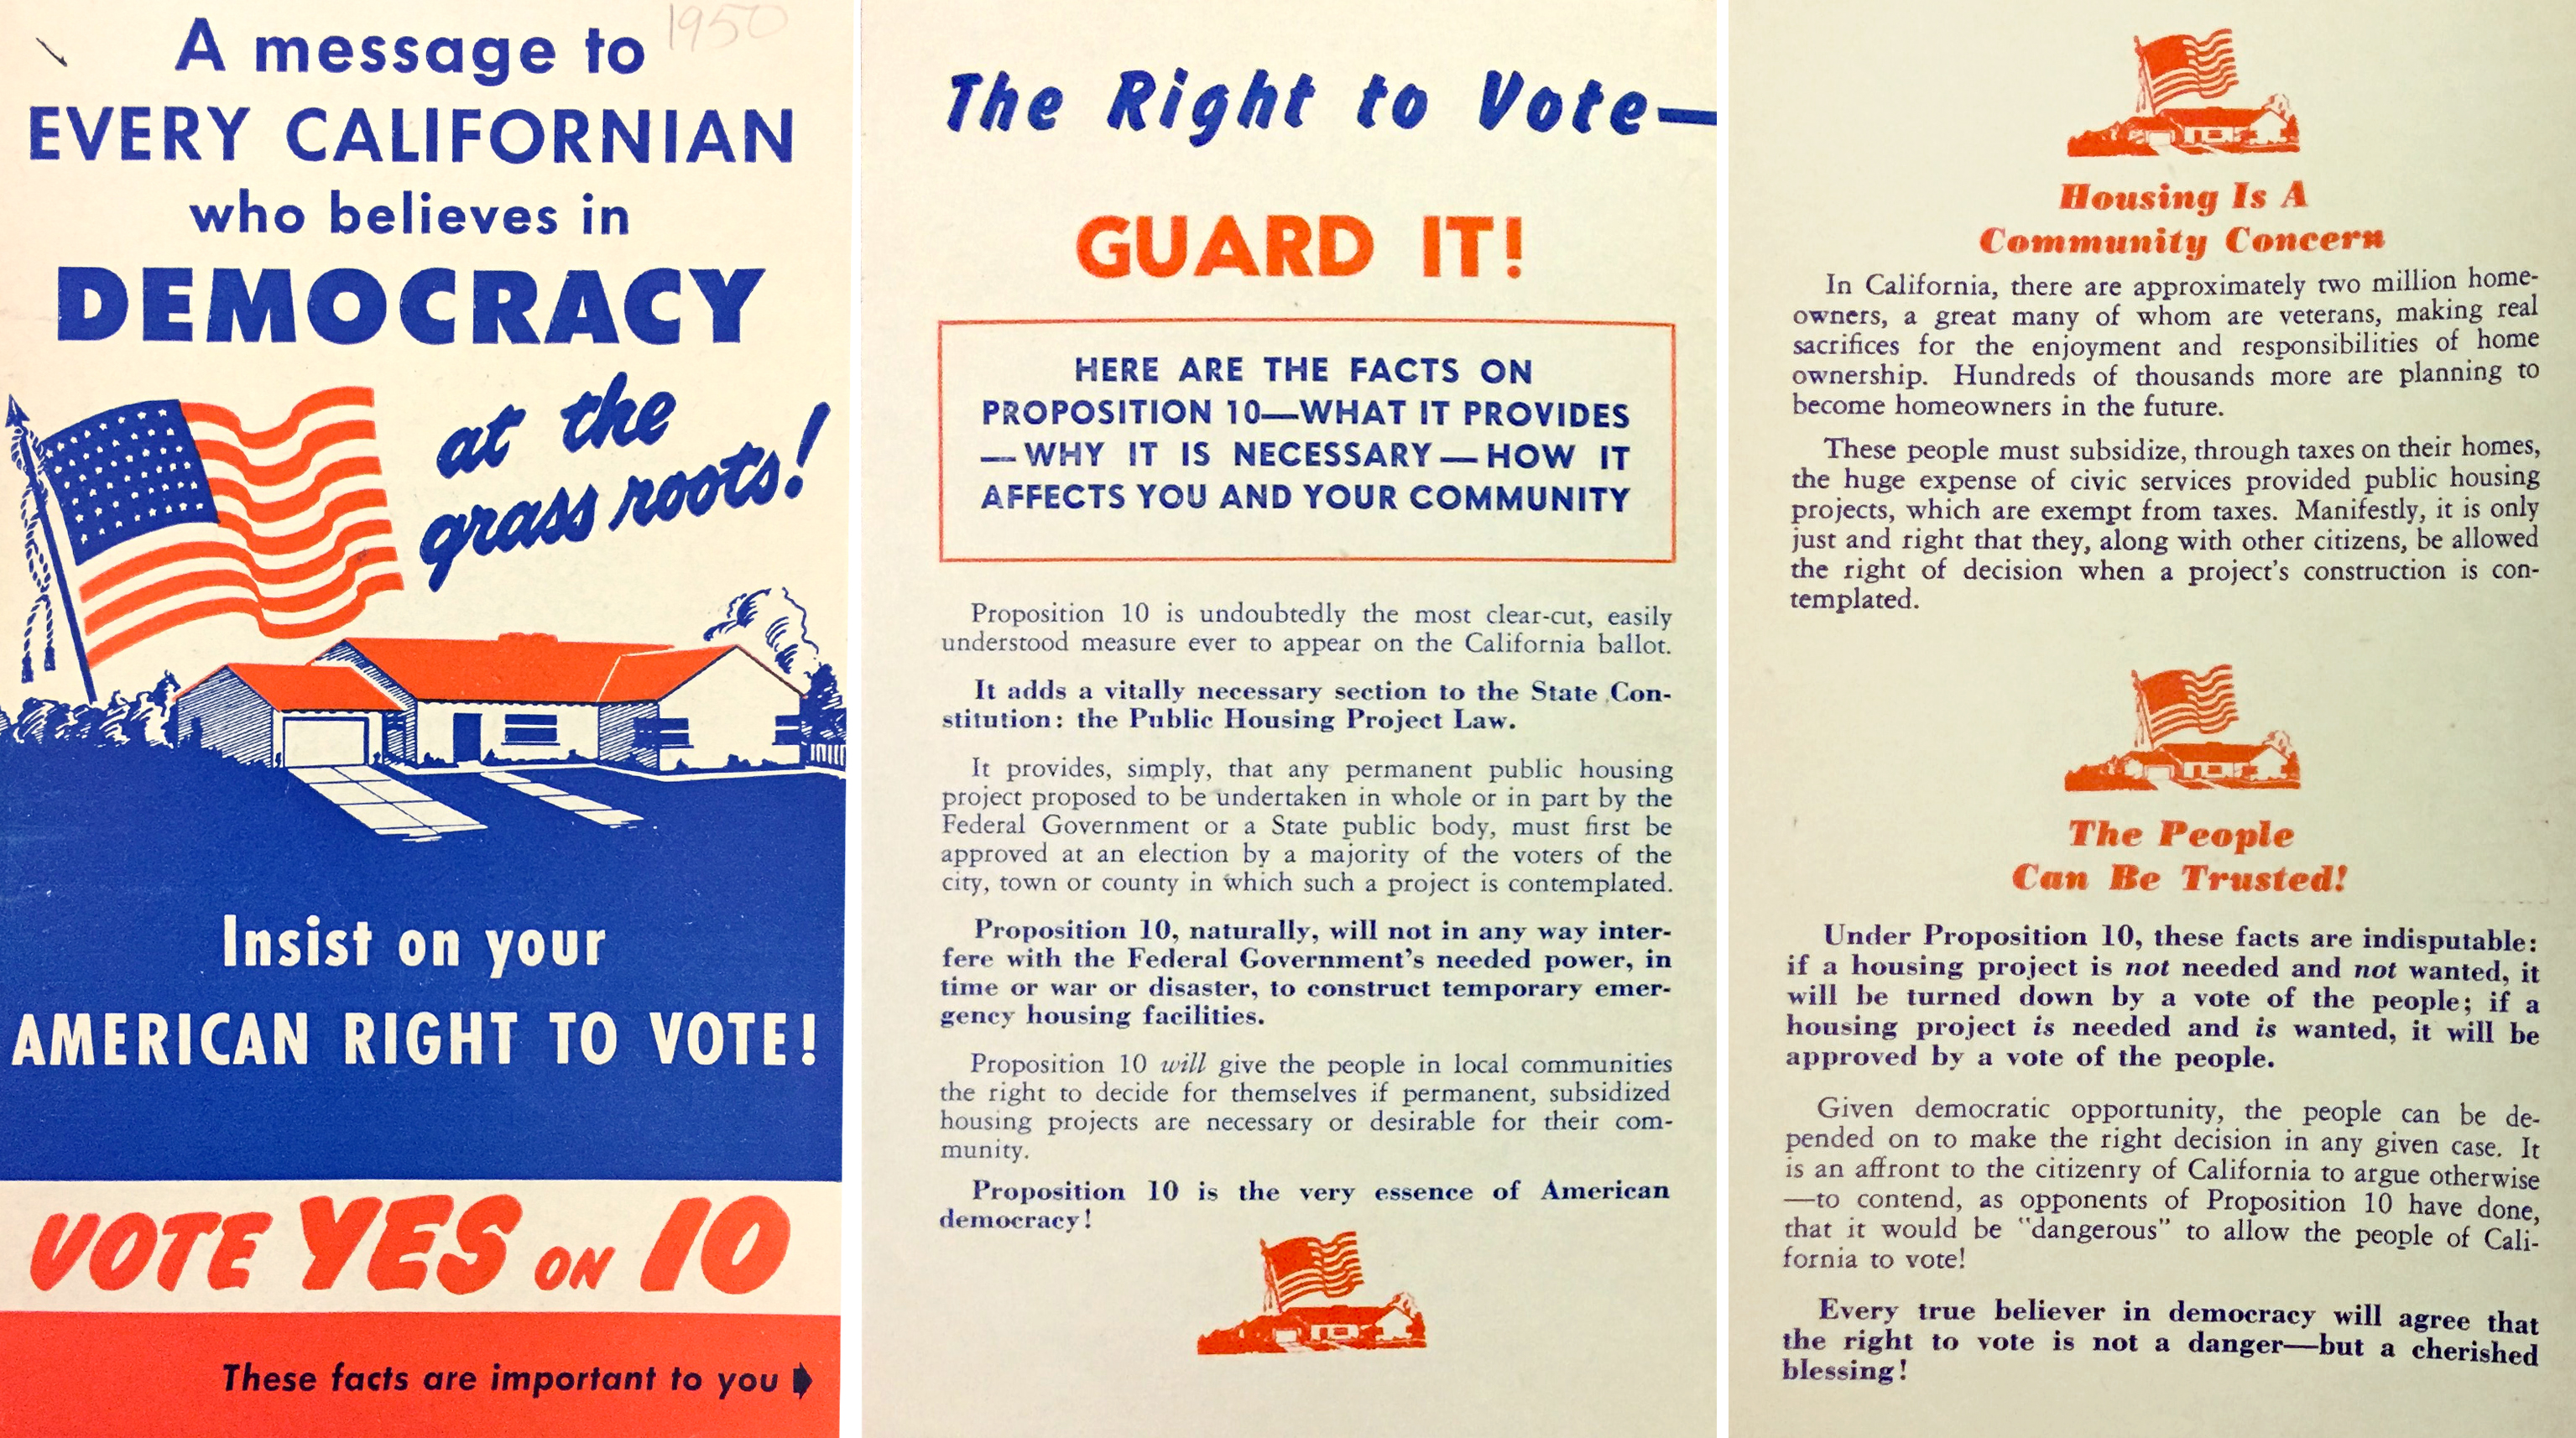 The San Francisco-based Northern California Committee for Home Protection’s 1950 campaign for Proposition 10 framed its opposition to public housing as a matter of democracy. The back of the pamphlet reads, “Proposition 10 guarantees the right to vote where that right is most important of all—at the local, grass roots level. Proposition 10 strengthens democracy. Proposition 10 protects the rights of citizens in every community of California.” 